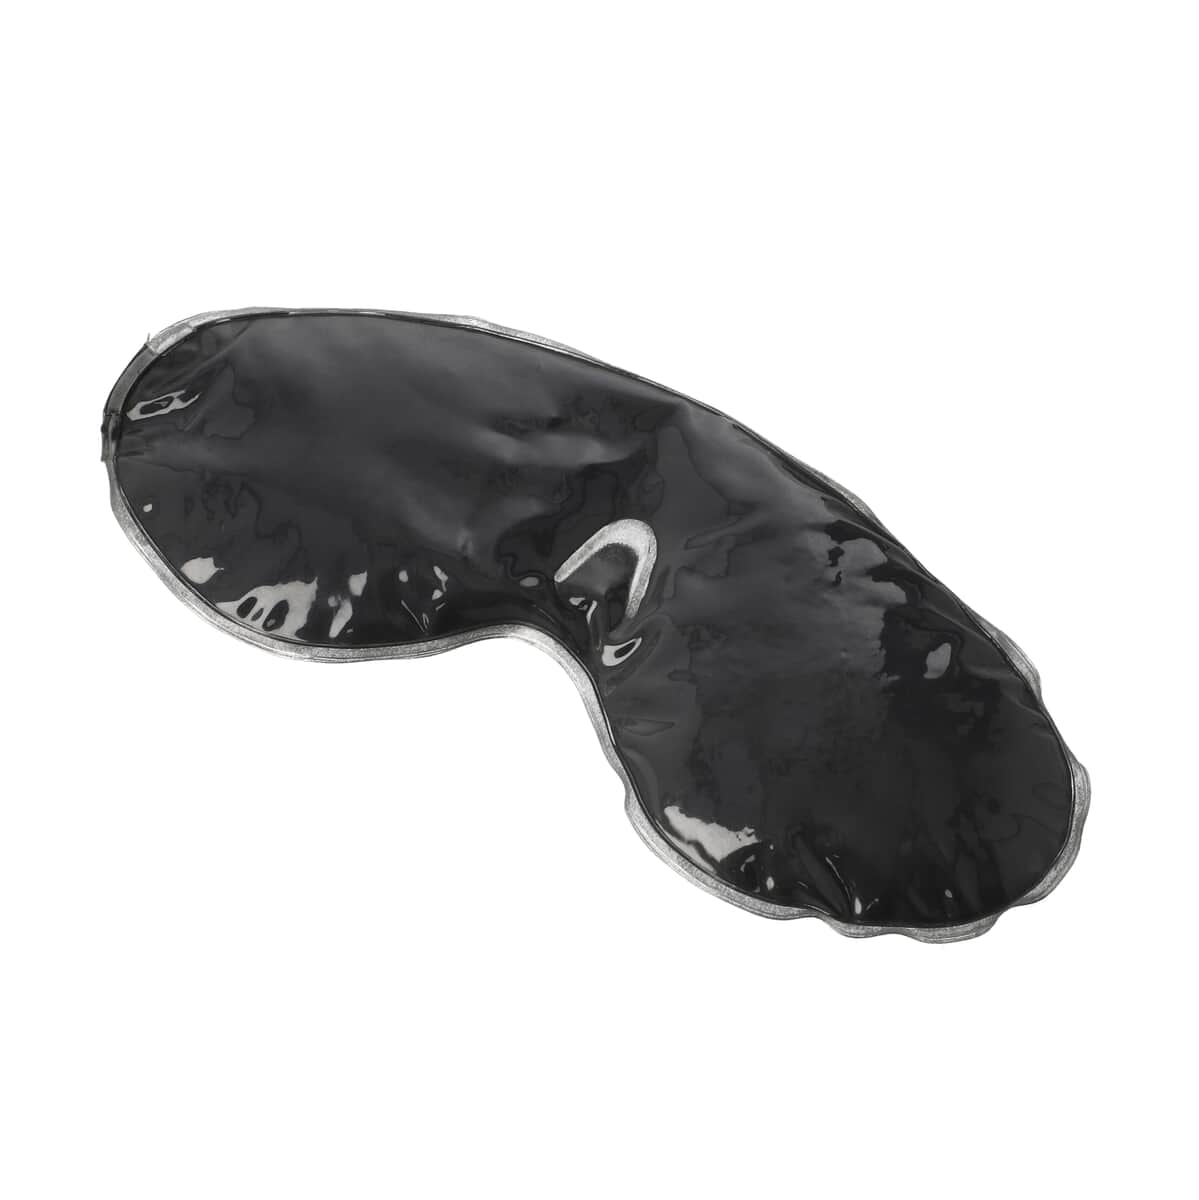 Multi Color Printed Cotton, Shungite Weighted Reusable Eye Mask with Shungite Gel Sleeve and Adjustable Strap image number 4